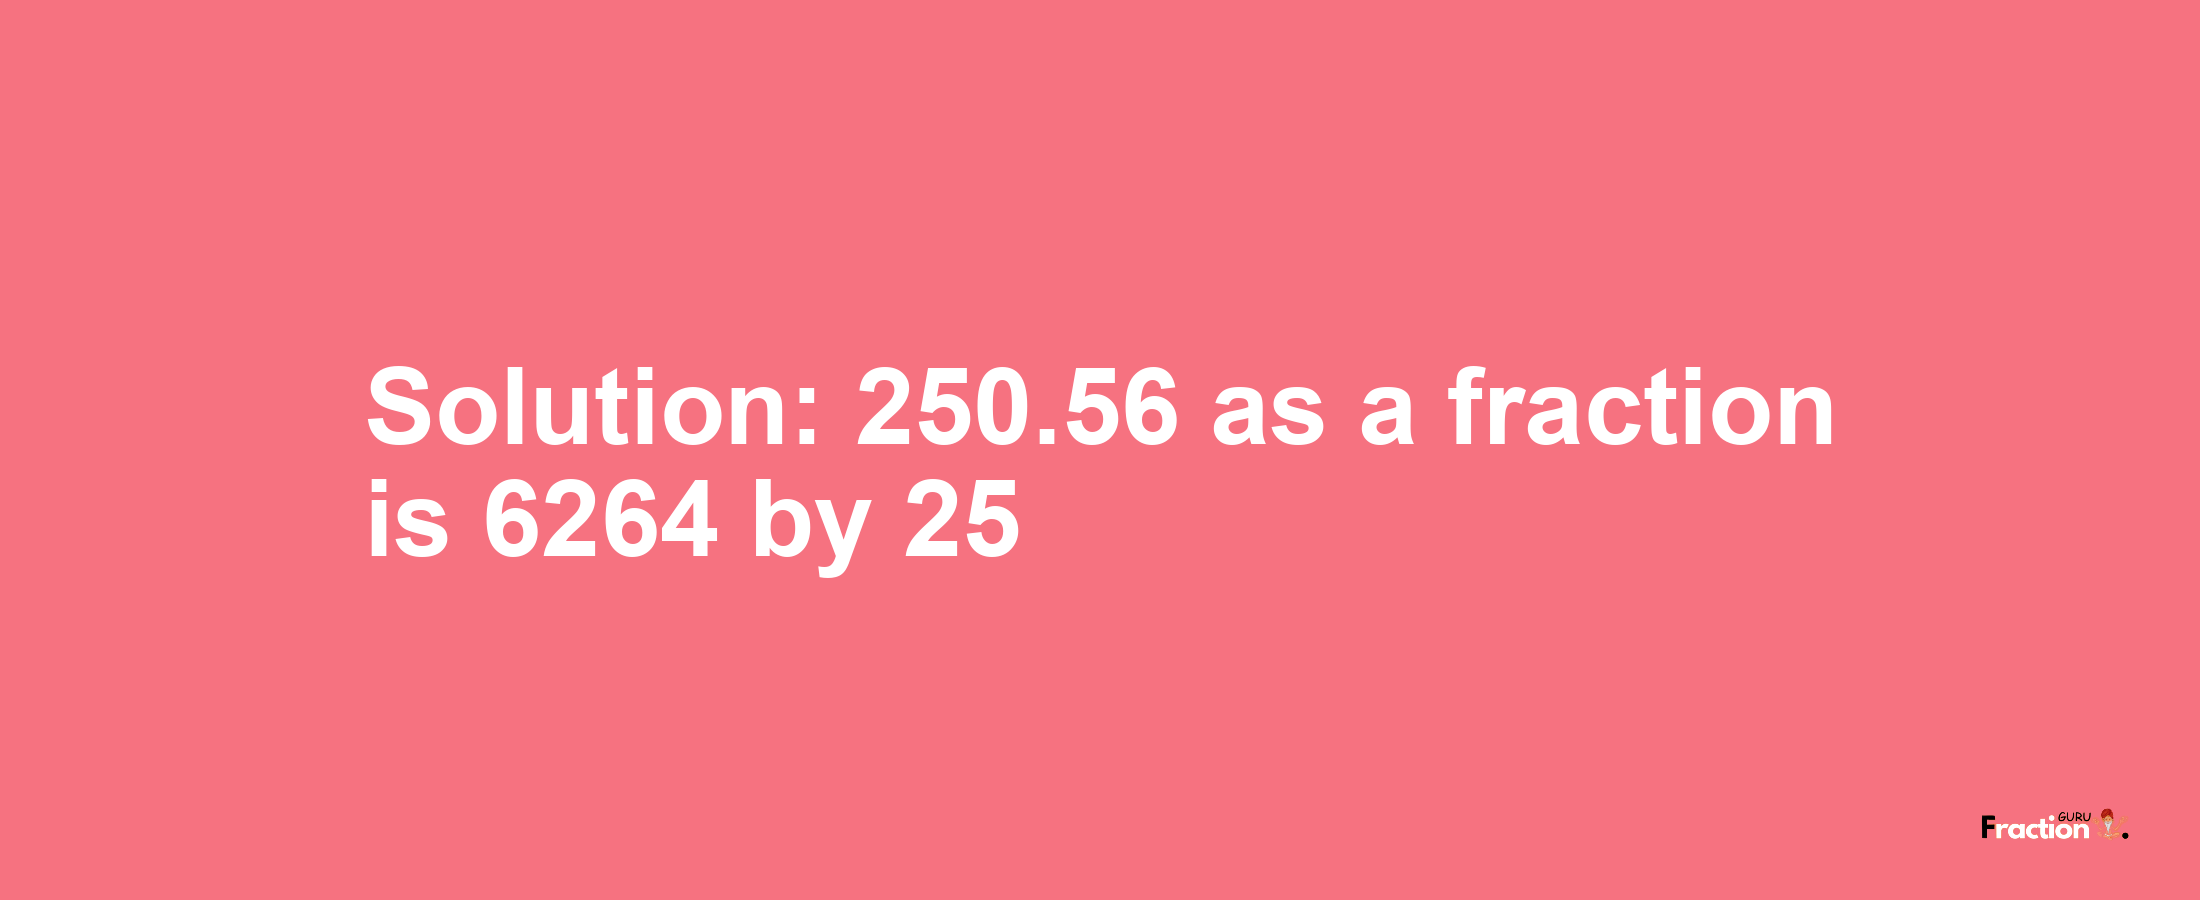 Solution:250.56 as a fraction is 6264/25